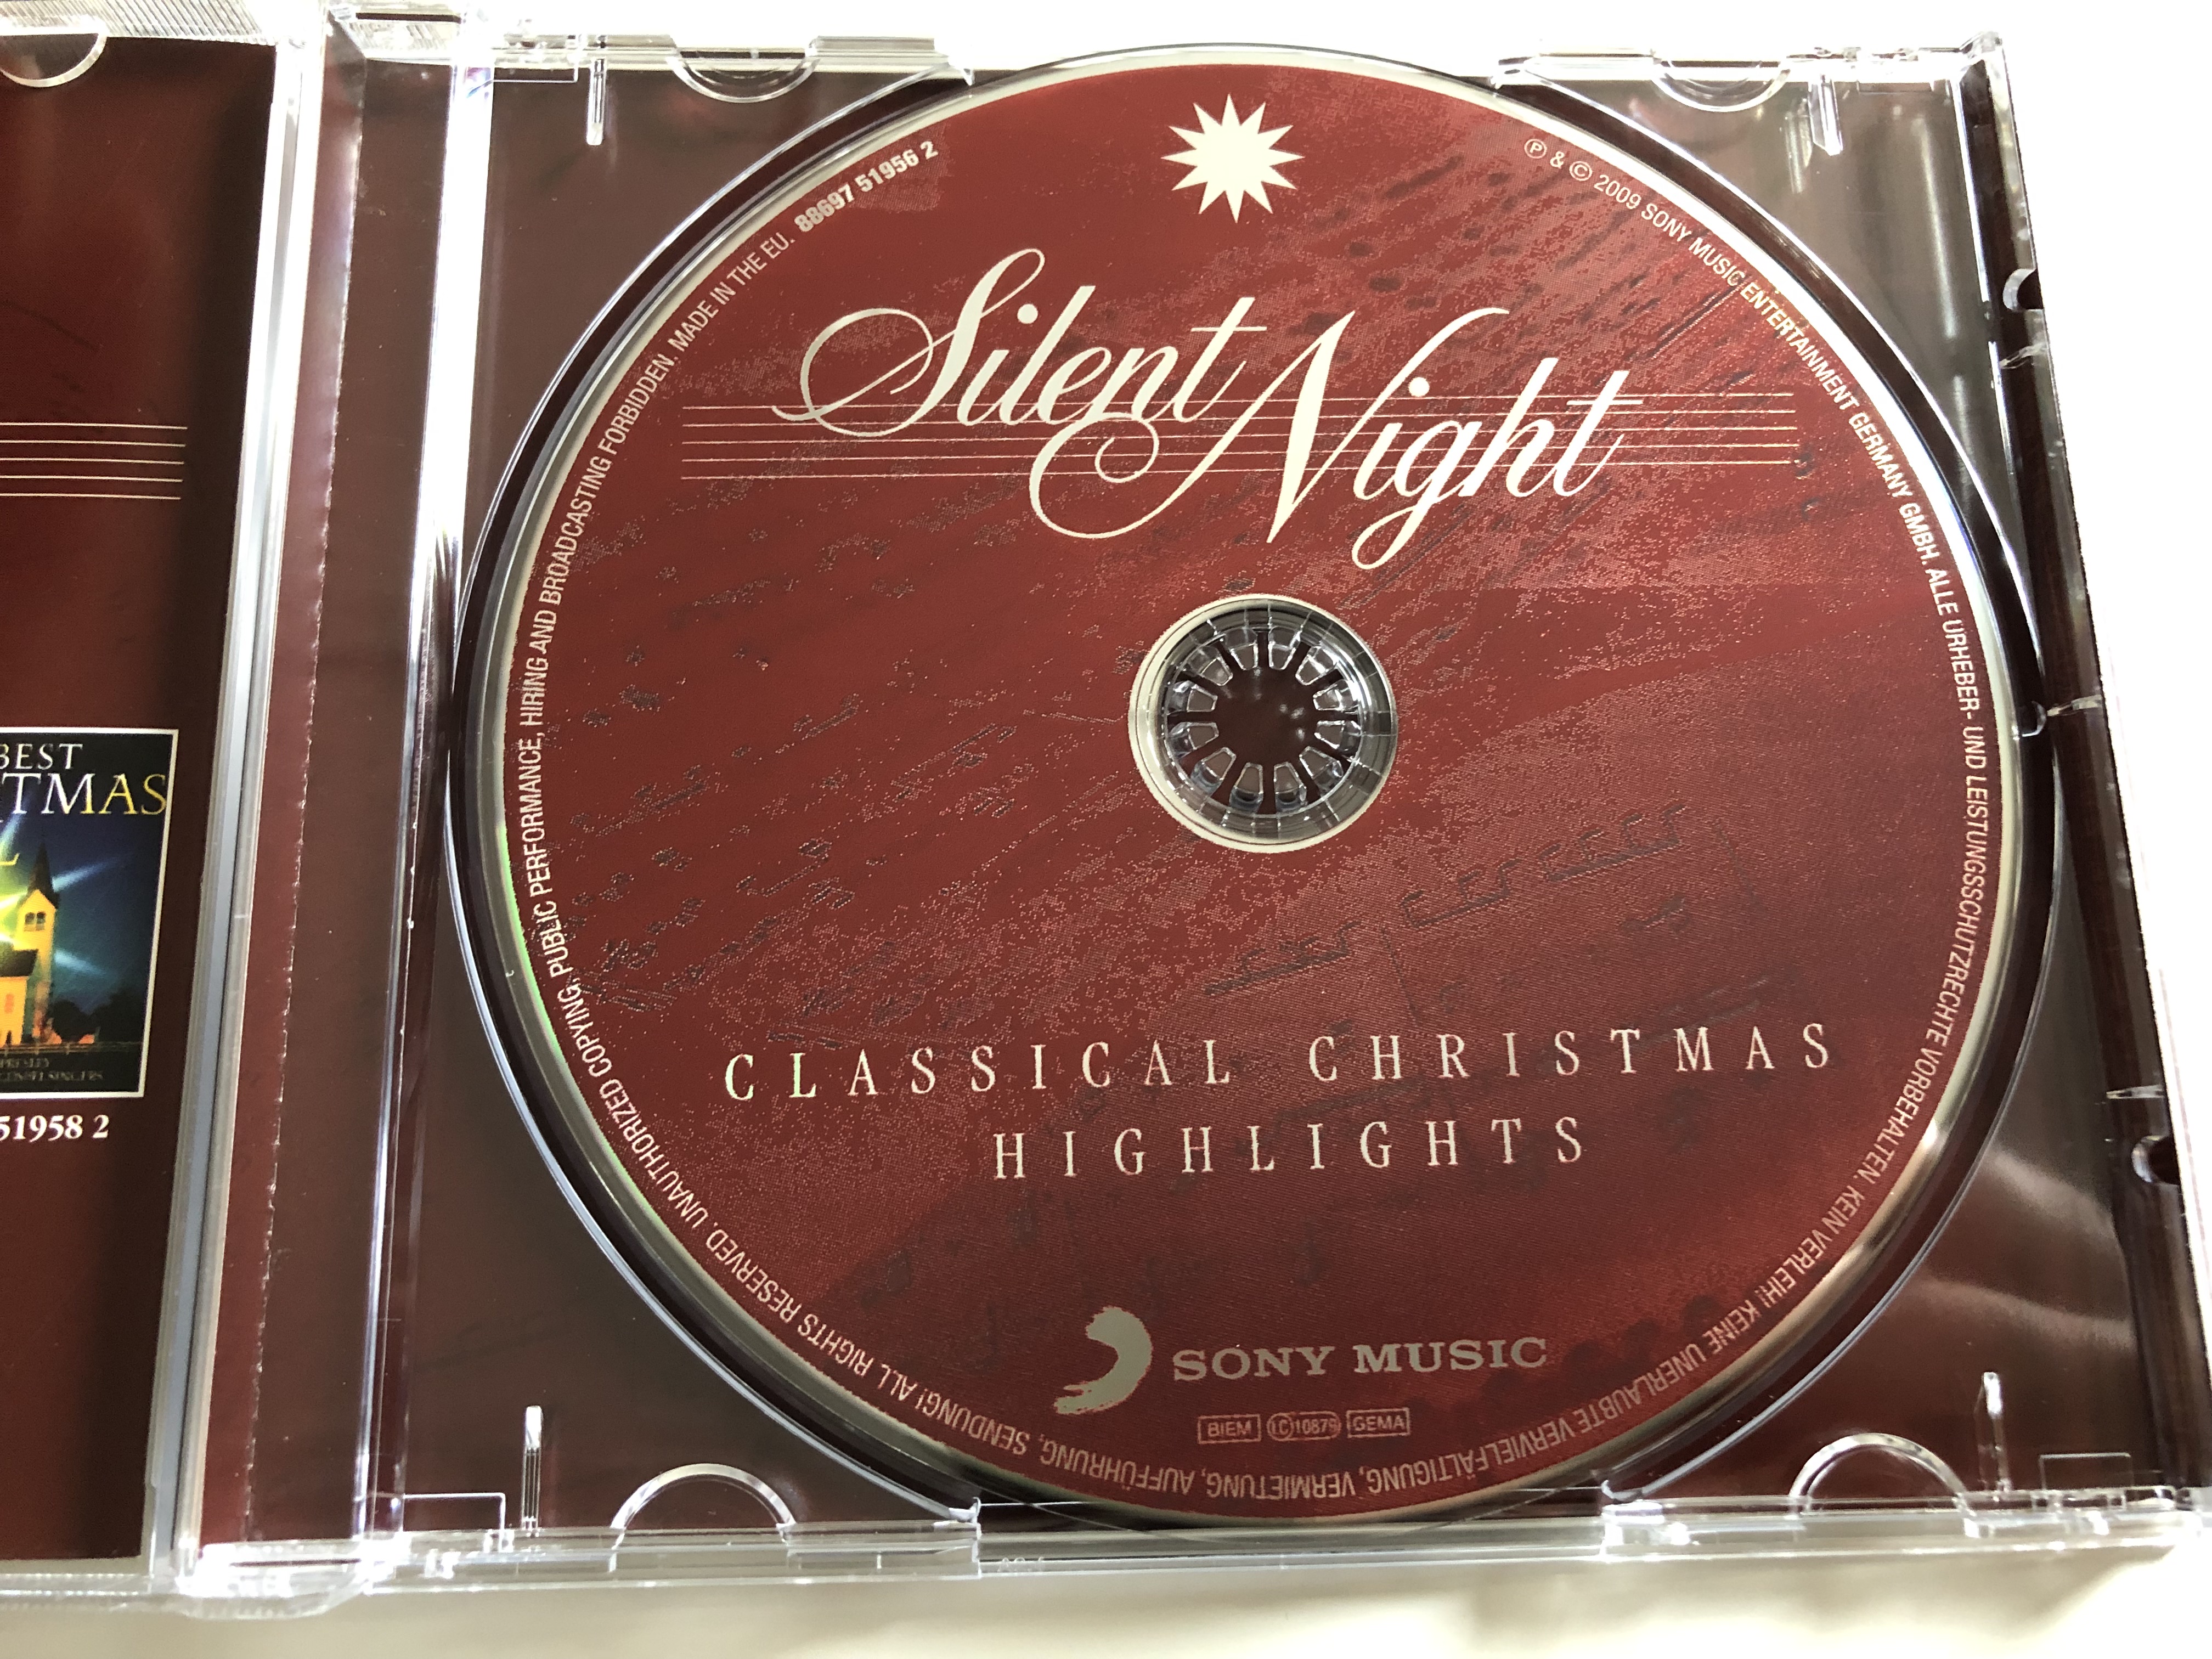 silent-night-classical-christmas-highlights-placido-domingo-paul-potts-james-galway-montserrat-caball-ave-maria-little-drummer-boy-hark-the-herald-angels-sing-audio-cd-2009-sony-music-4-.jpg